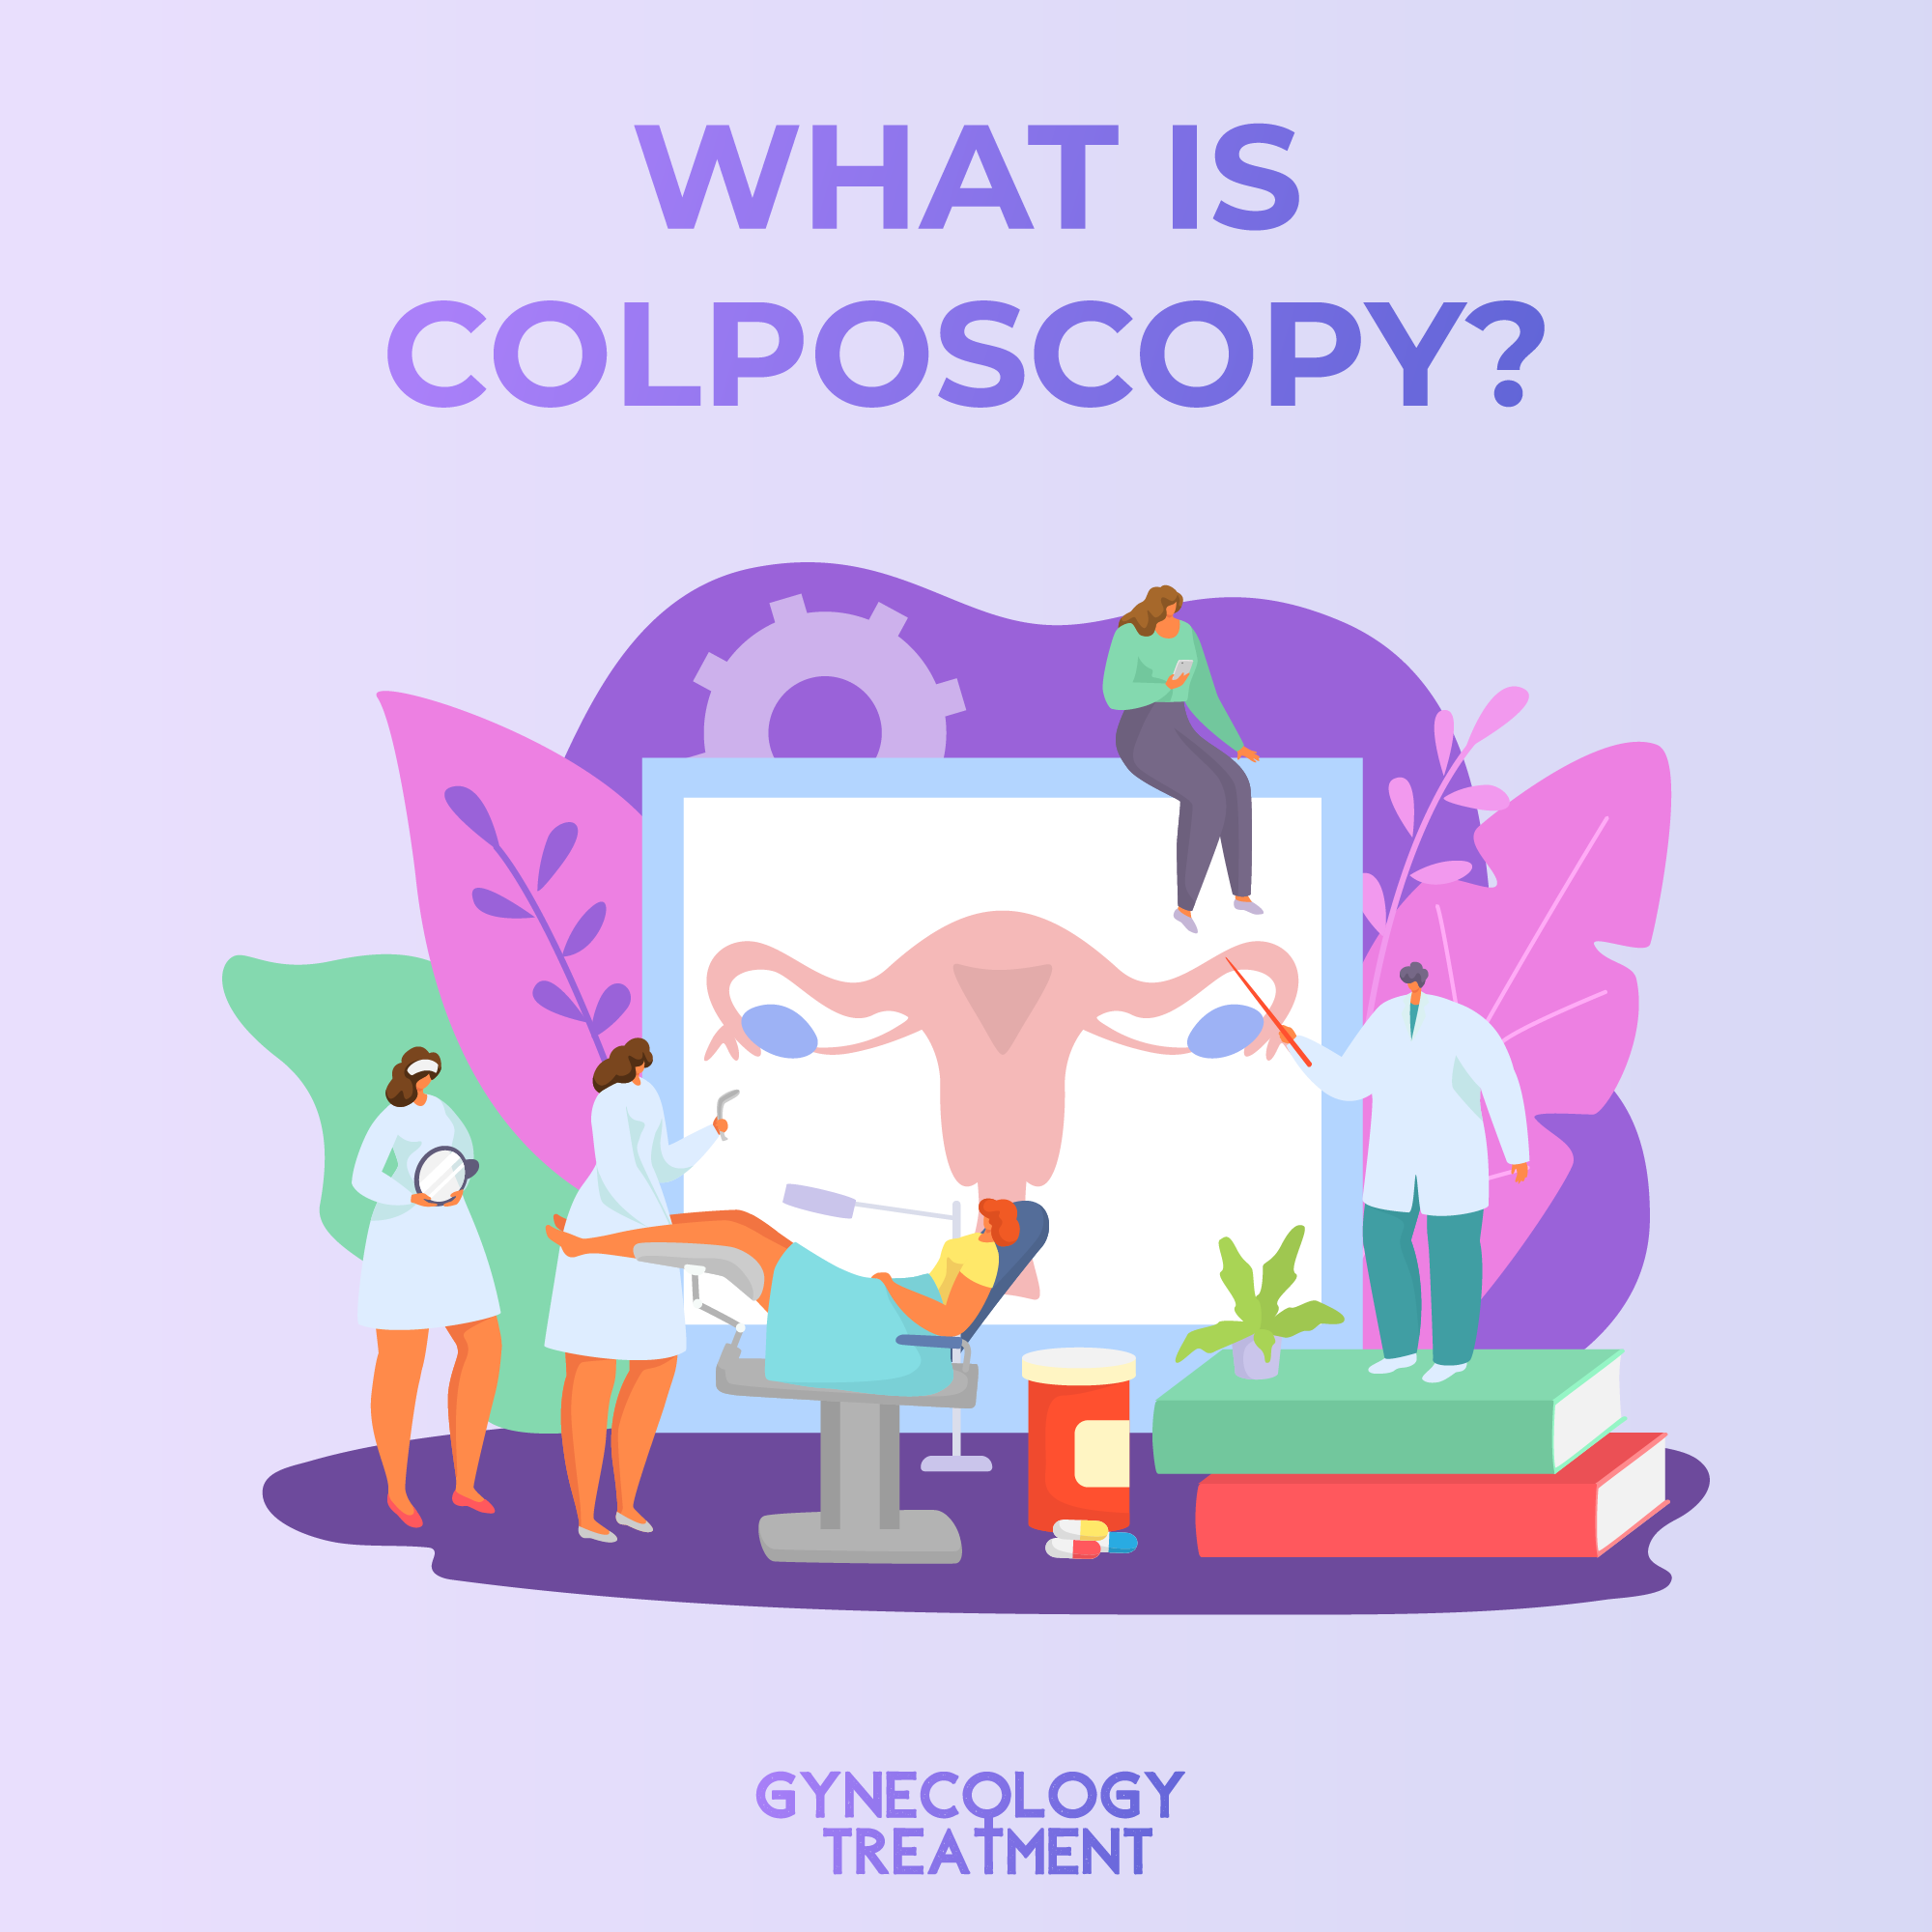 What is colposcopy?